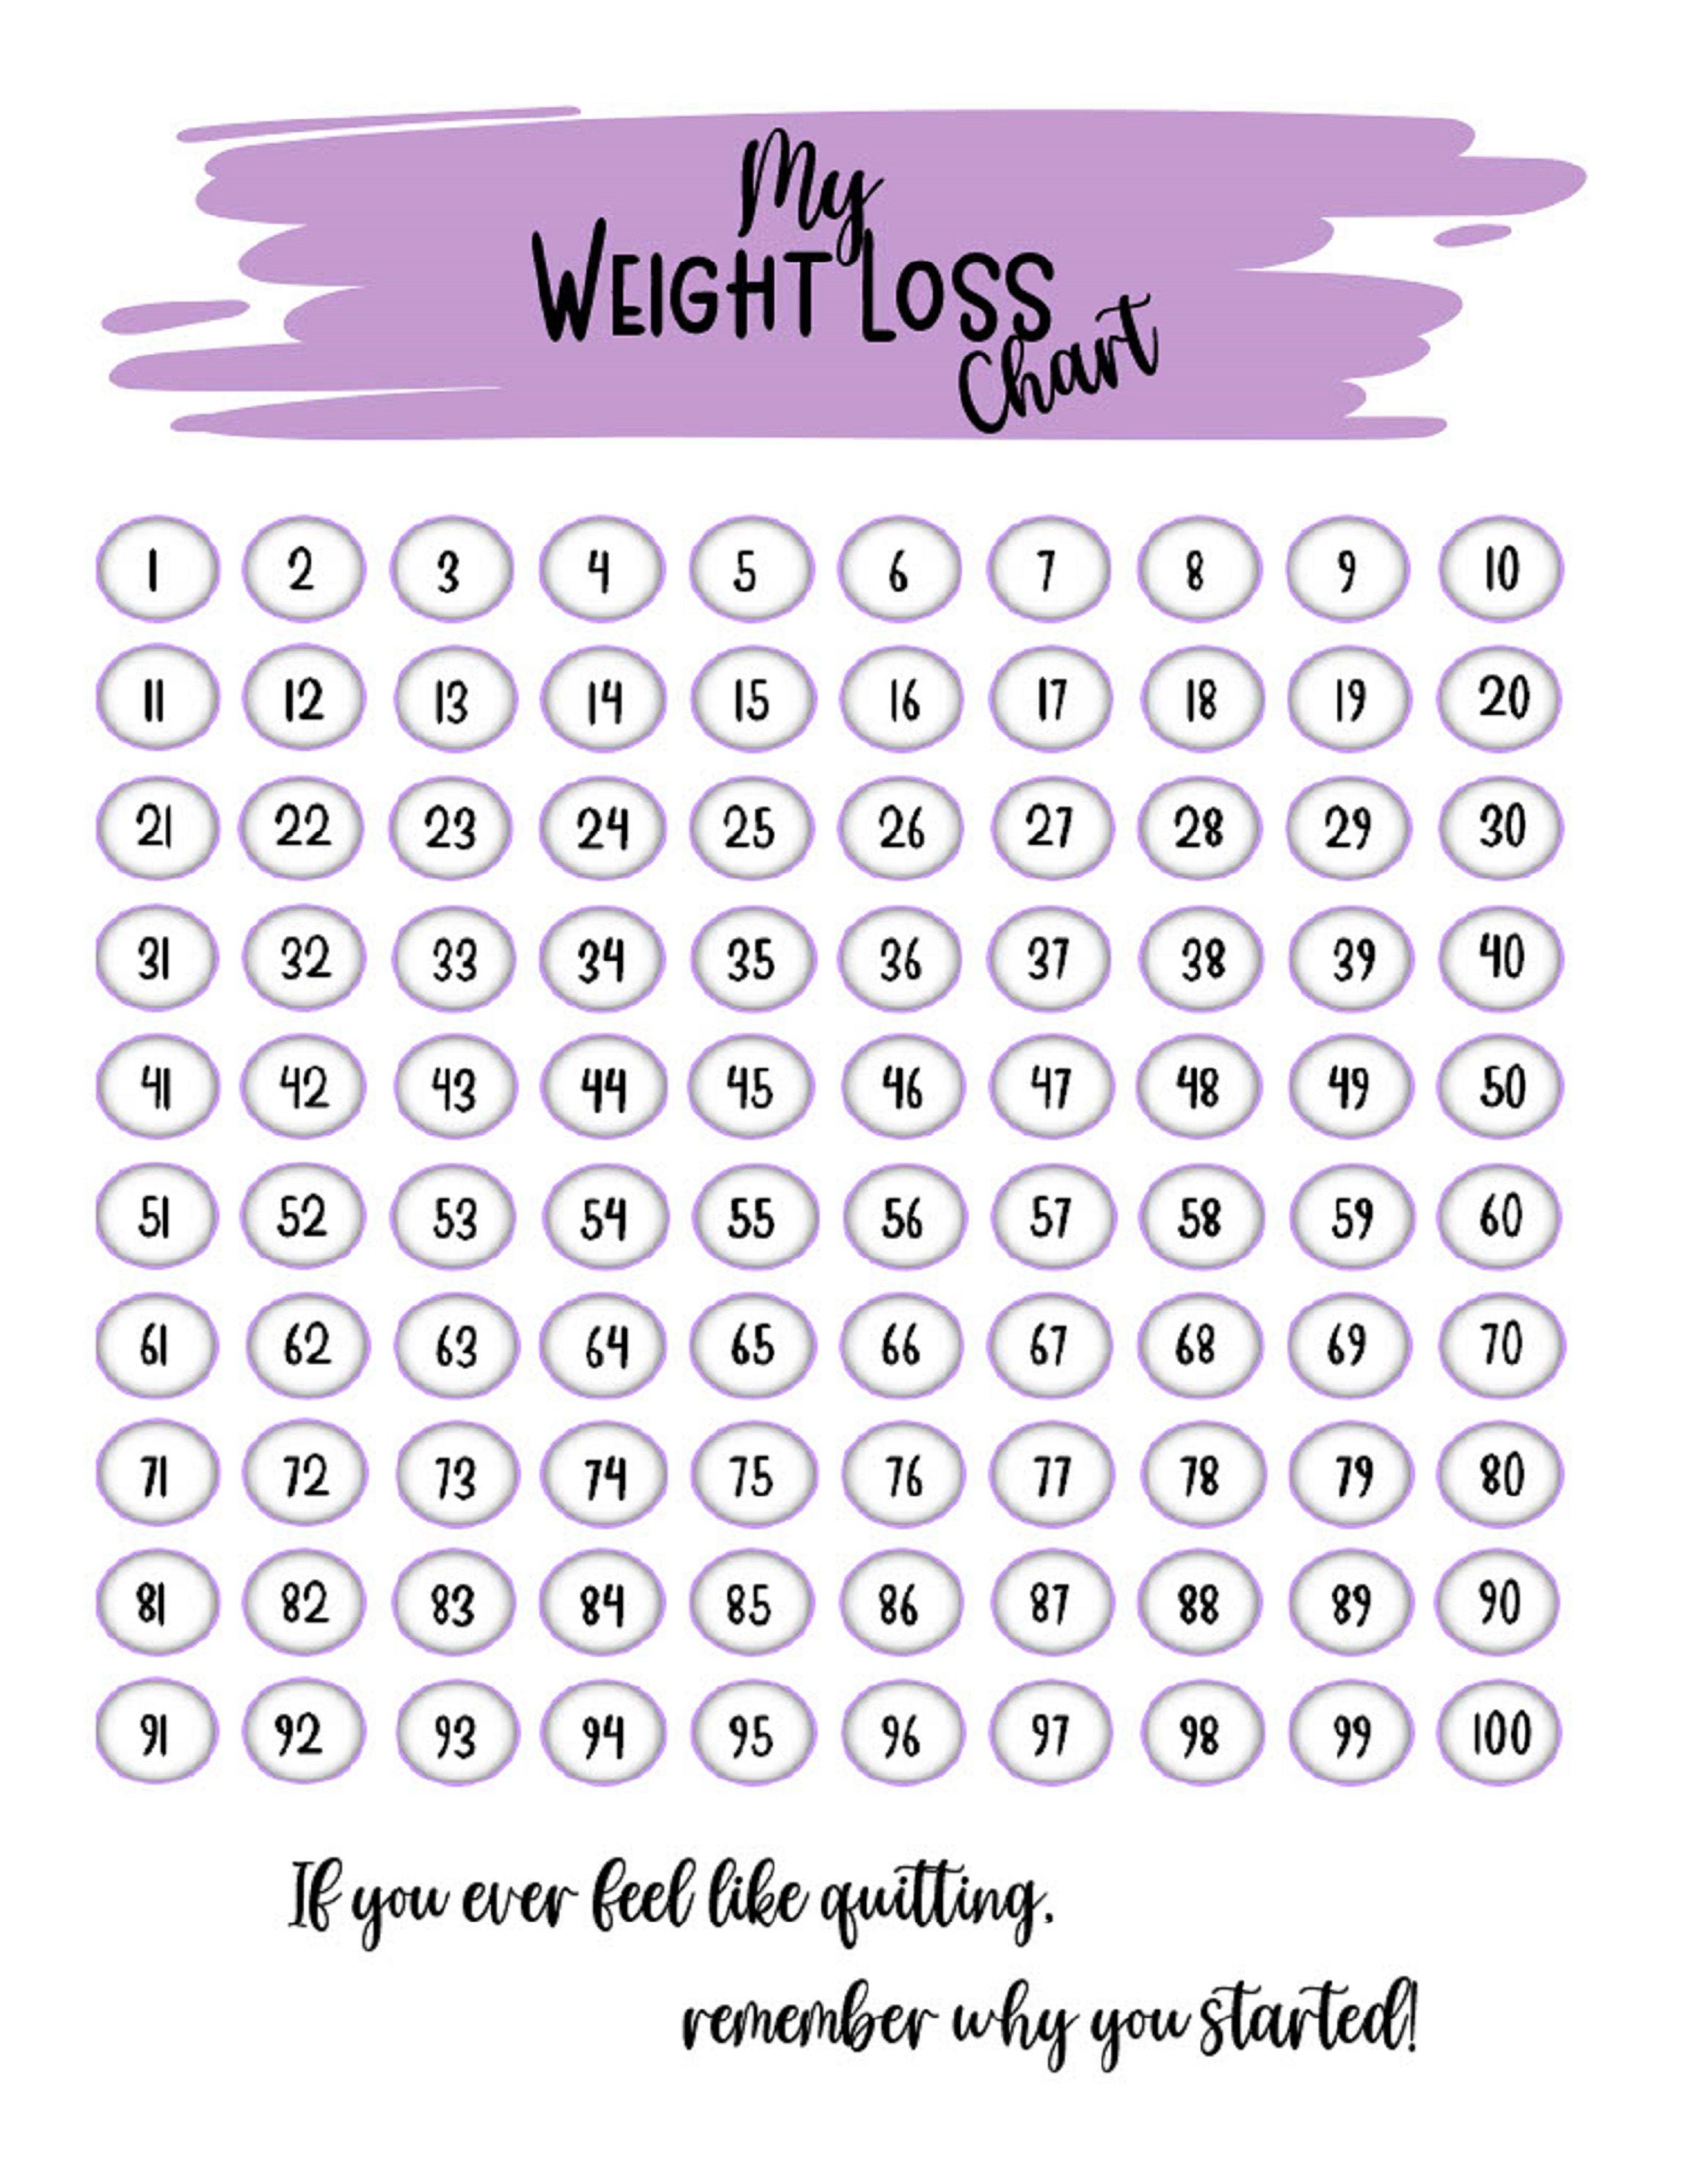 weight-loss-chart-weight-loss-tracker-pounds-lost-chart-100-pounds-three-different-sizes-a4